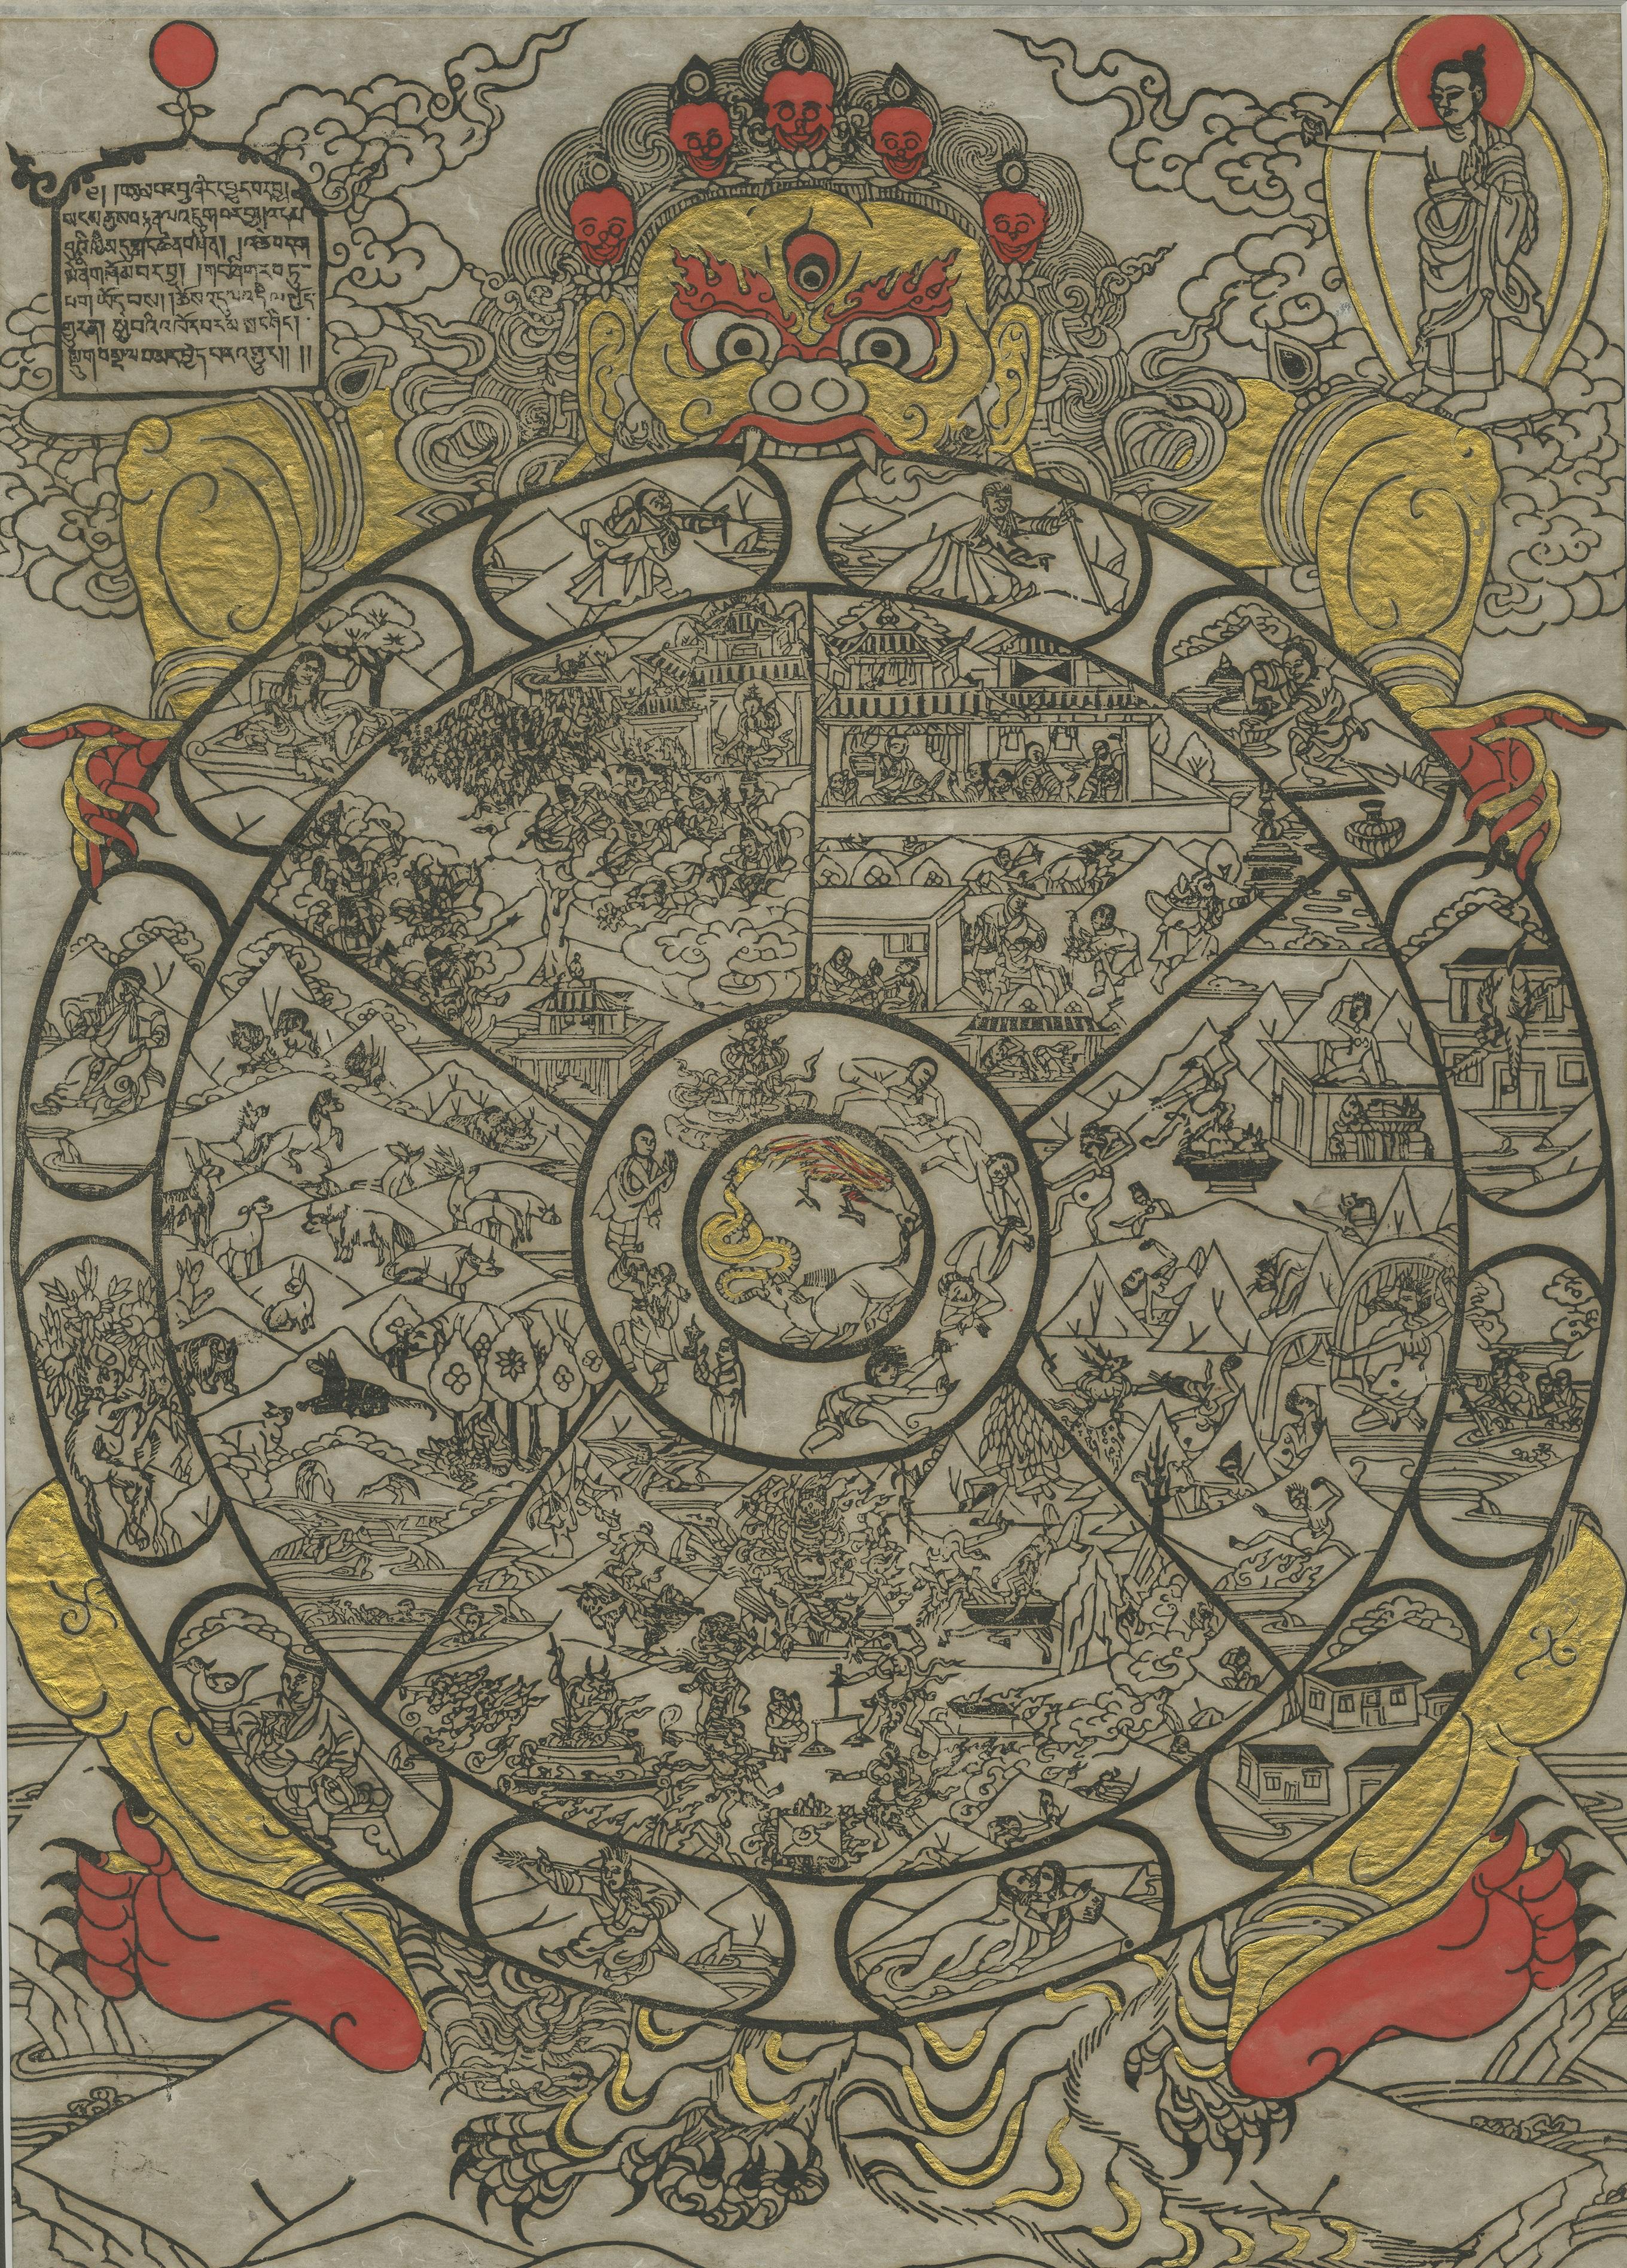 Beautiful print of the Bhavachakra, the Wheel of Life or Wheel of Becoming, which is a mandala - a complex picture representing the Buddhist view of the universe. To Buddhists, existence is a cycle of life, death, rebirth and suffering that they